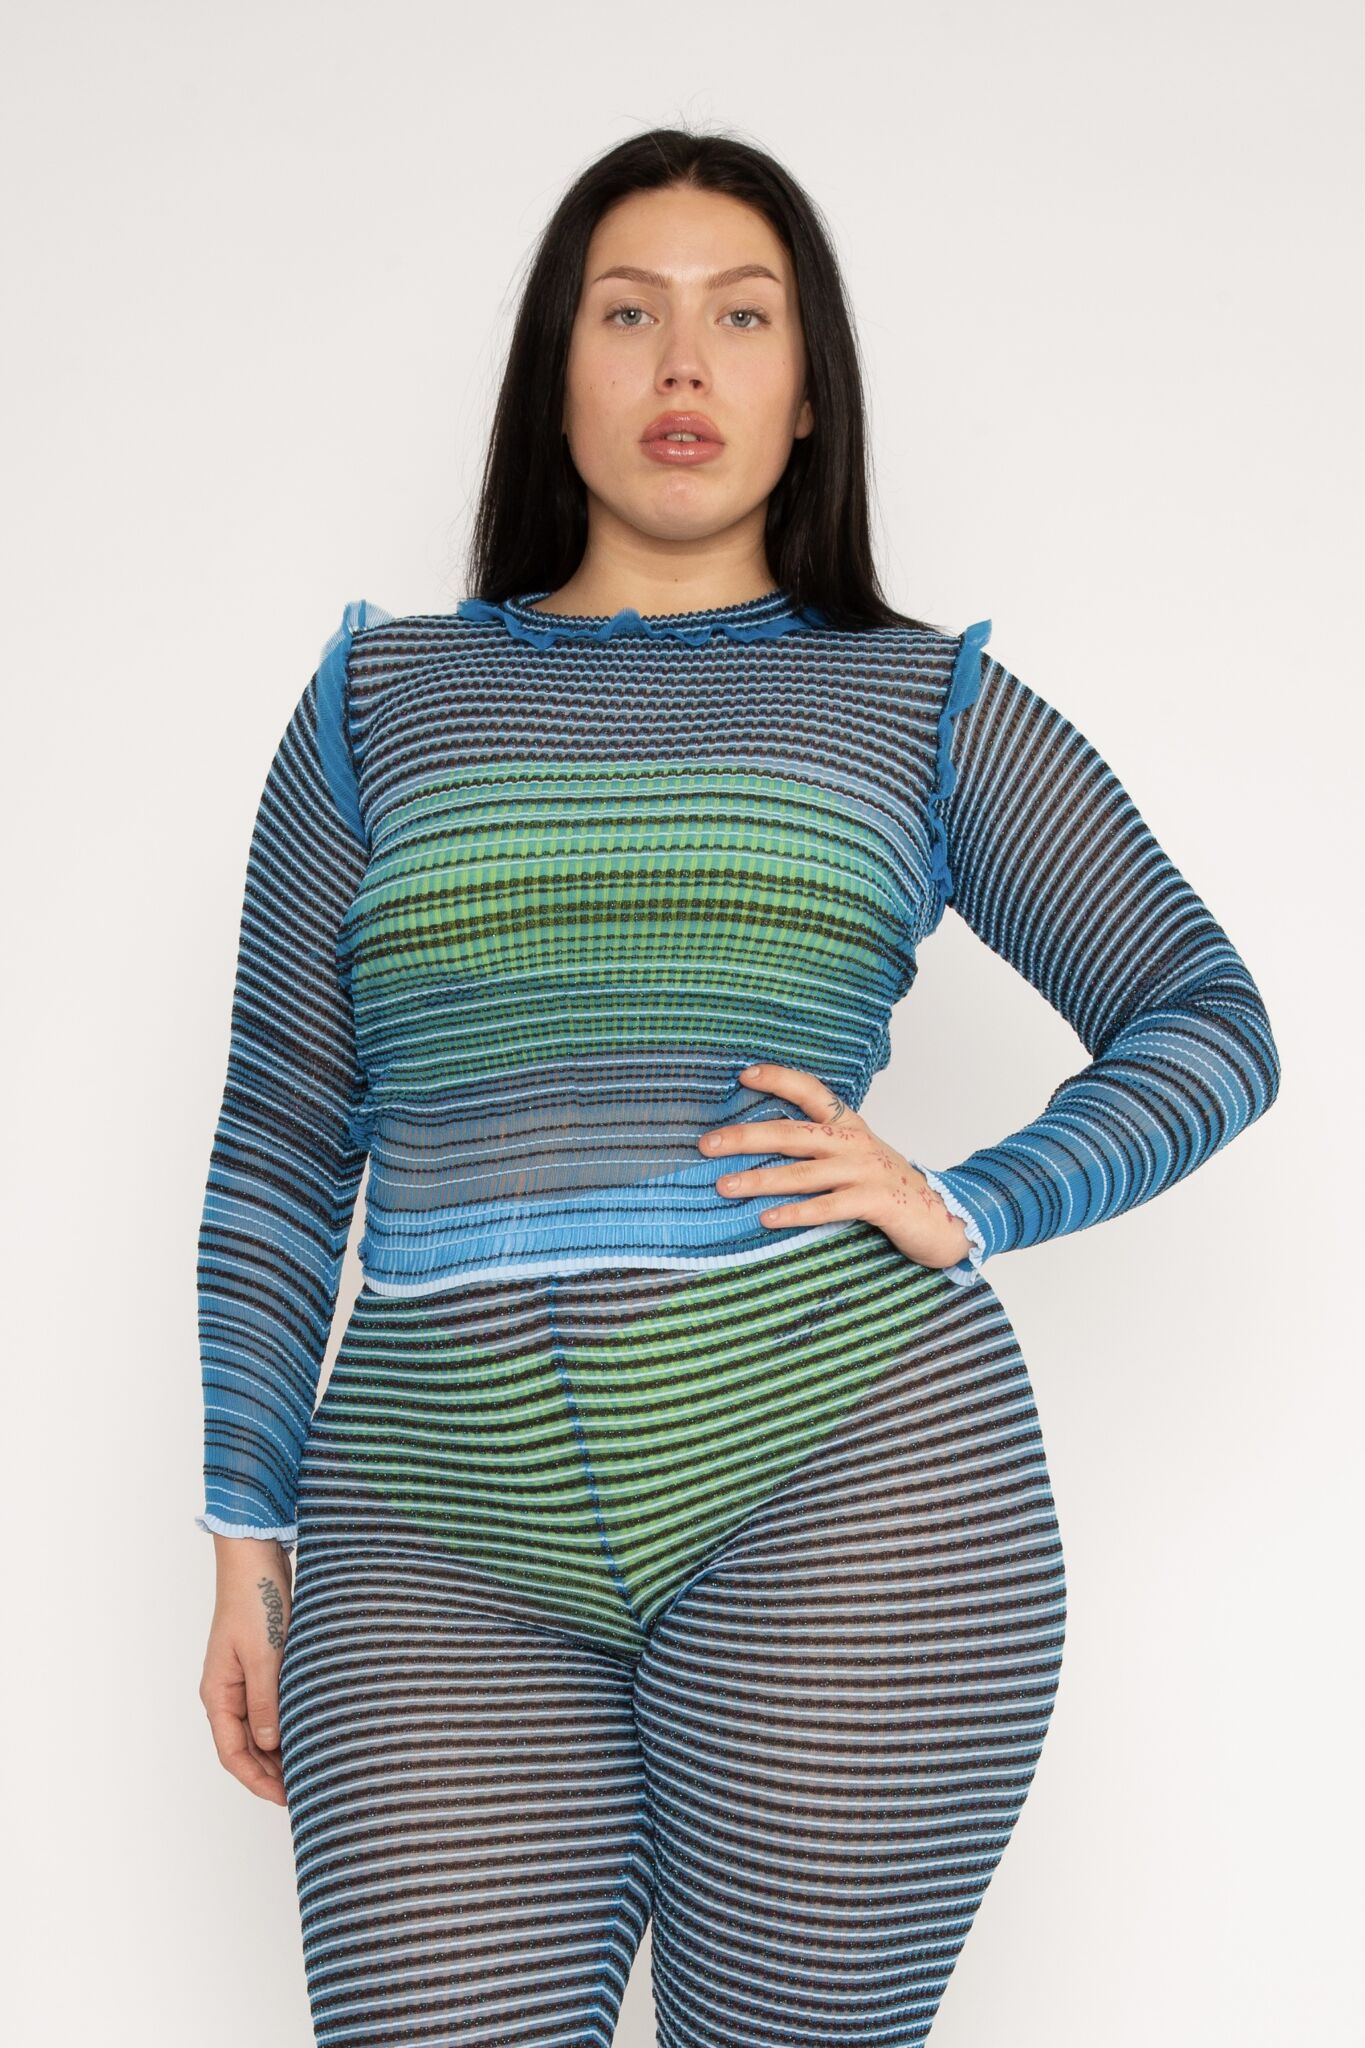 Secret Stripes knitted Jumper, top and trousers in blue and brown